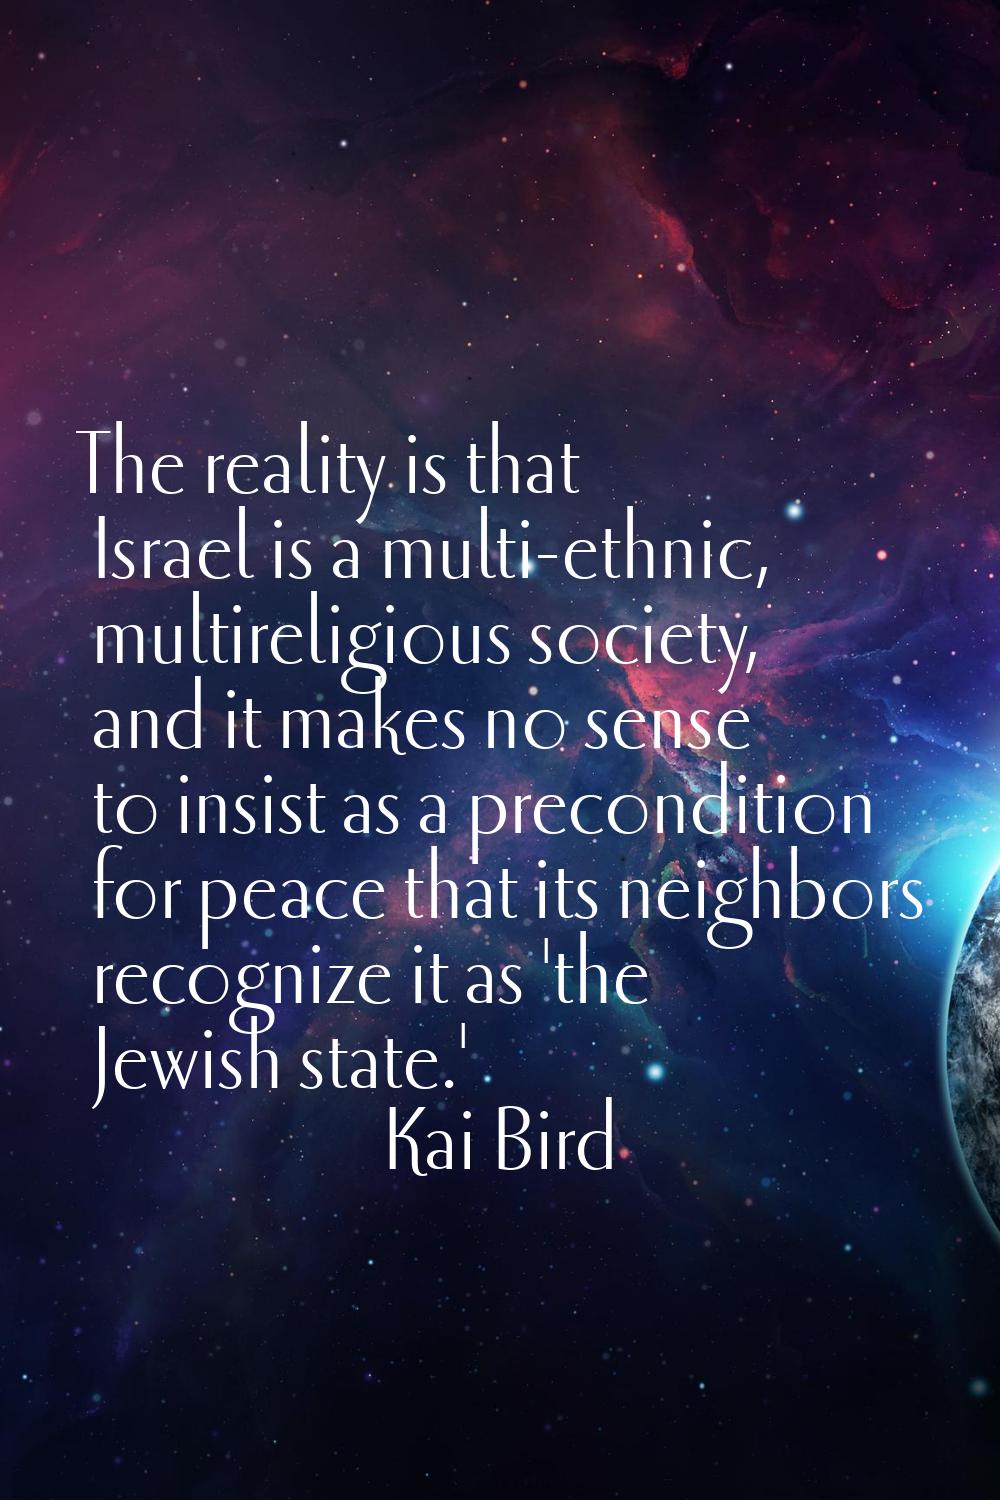 The reality is that Israel is a multi-ethnic, multireligious society, and it makes no sense to insi